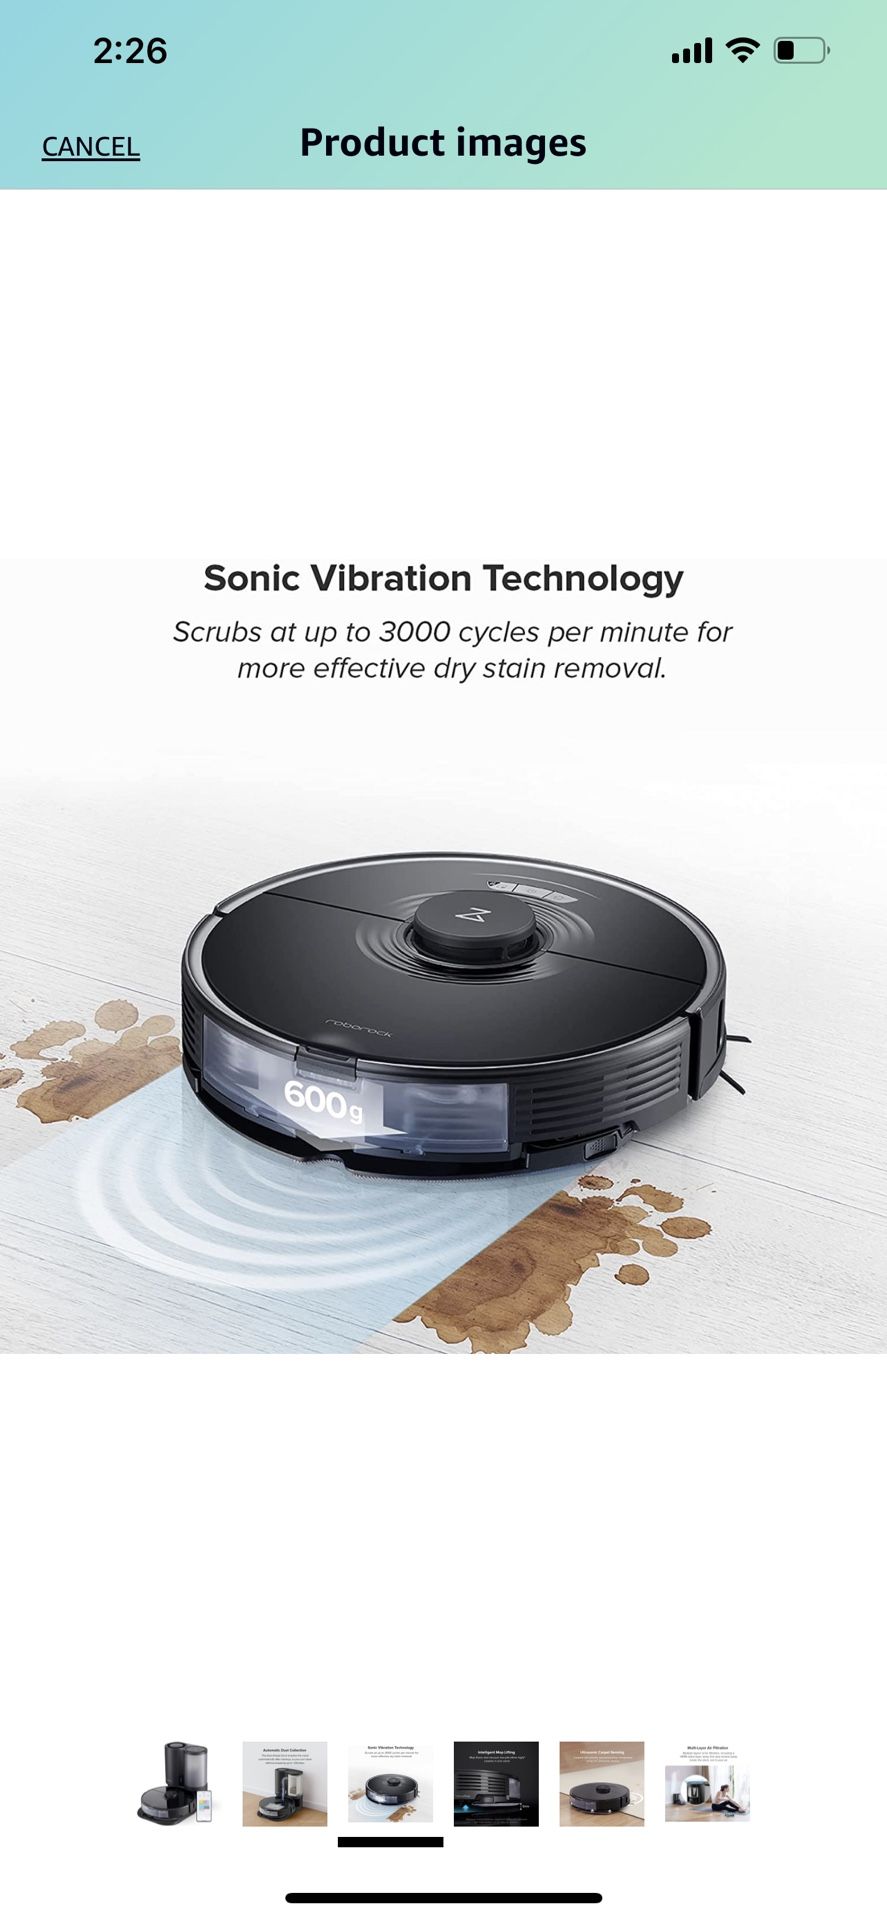 Roborock S7+ Robot Vacuum and Sonic Mop with Auto-Empty Dock, Stores up to 60-Days of Dust, Auto Lifting Mop, Ultrasonic Carpet Detection, 2500Pa Suct